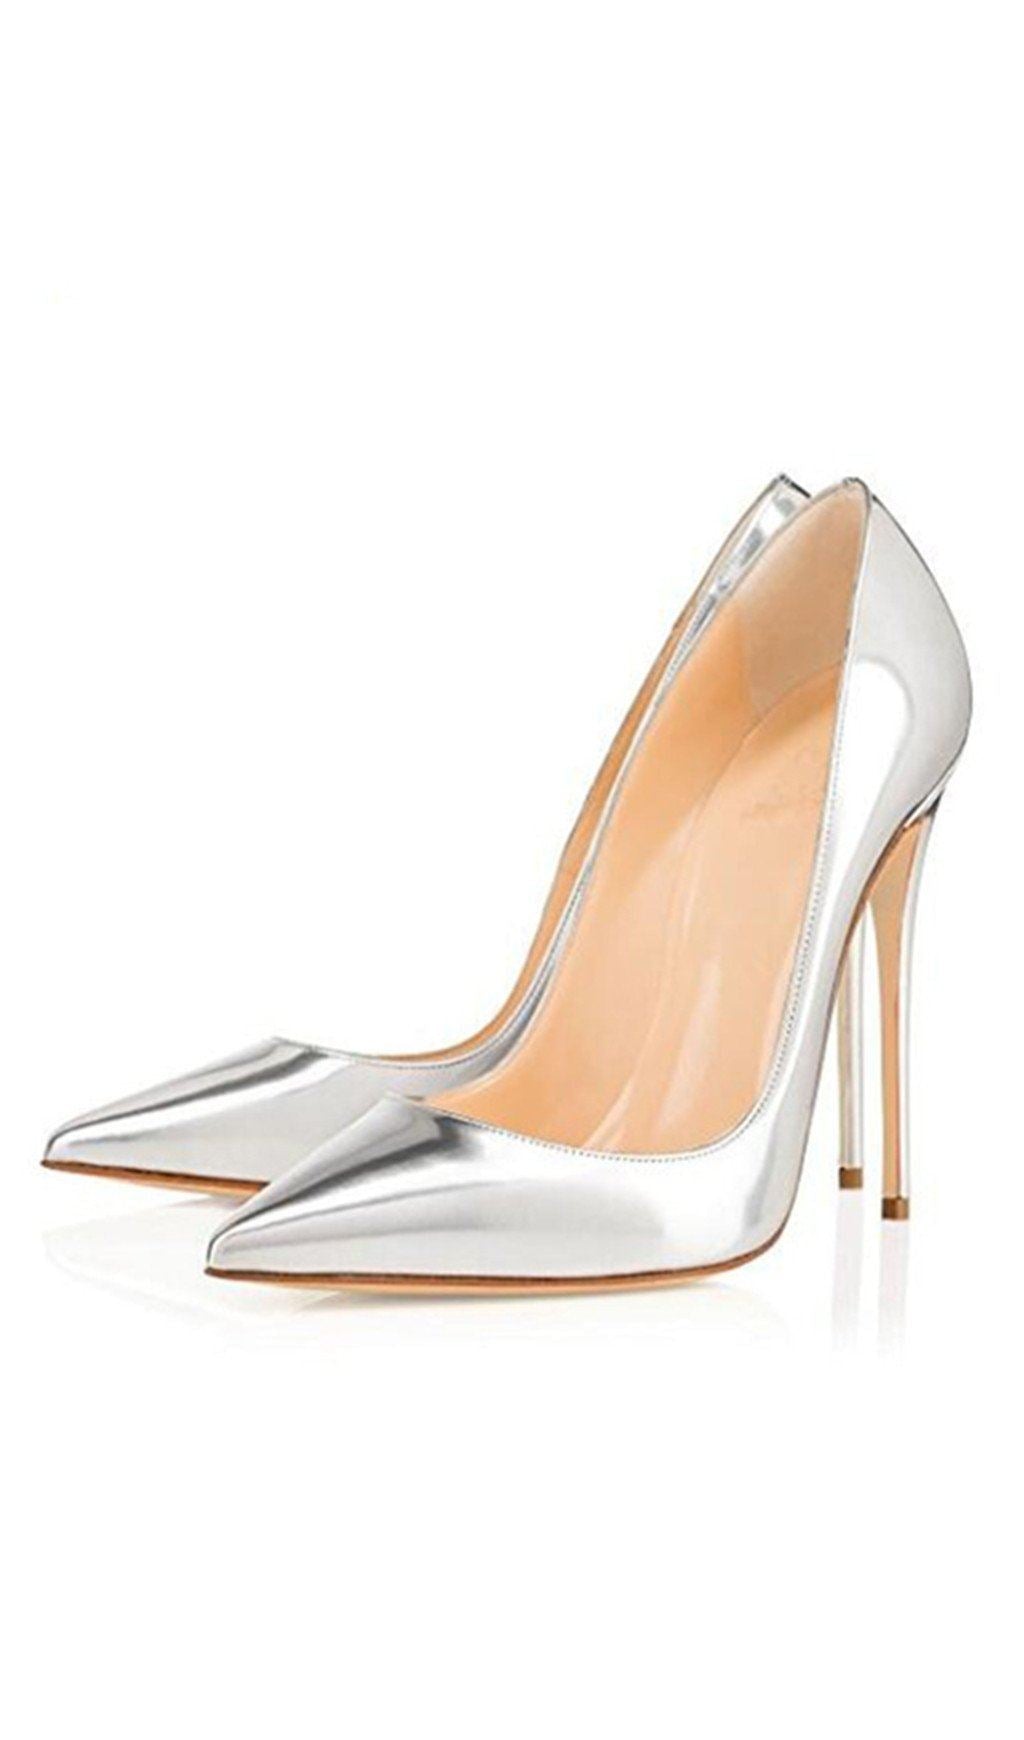 Rose Gold StiLetto High Heel Shoes